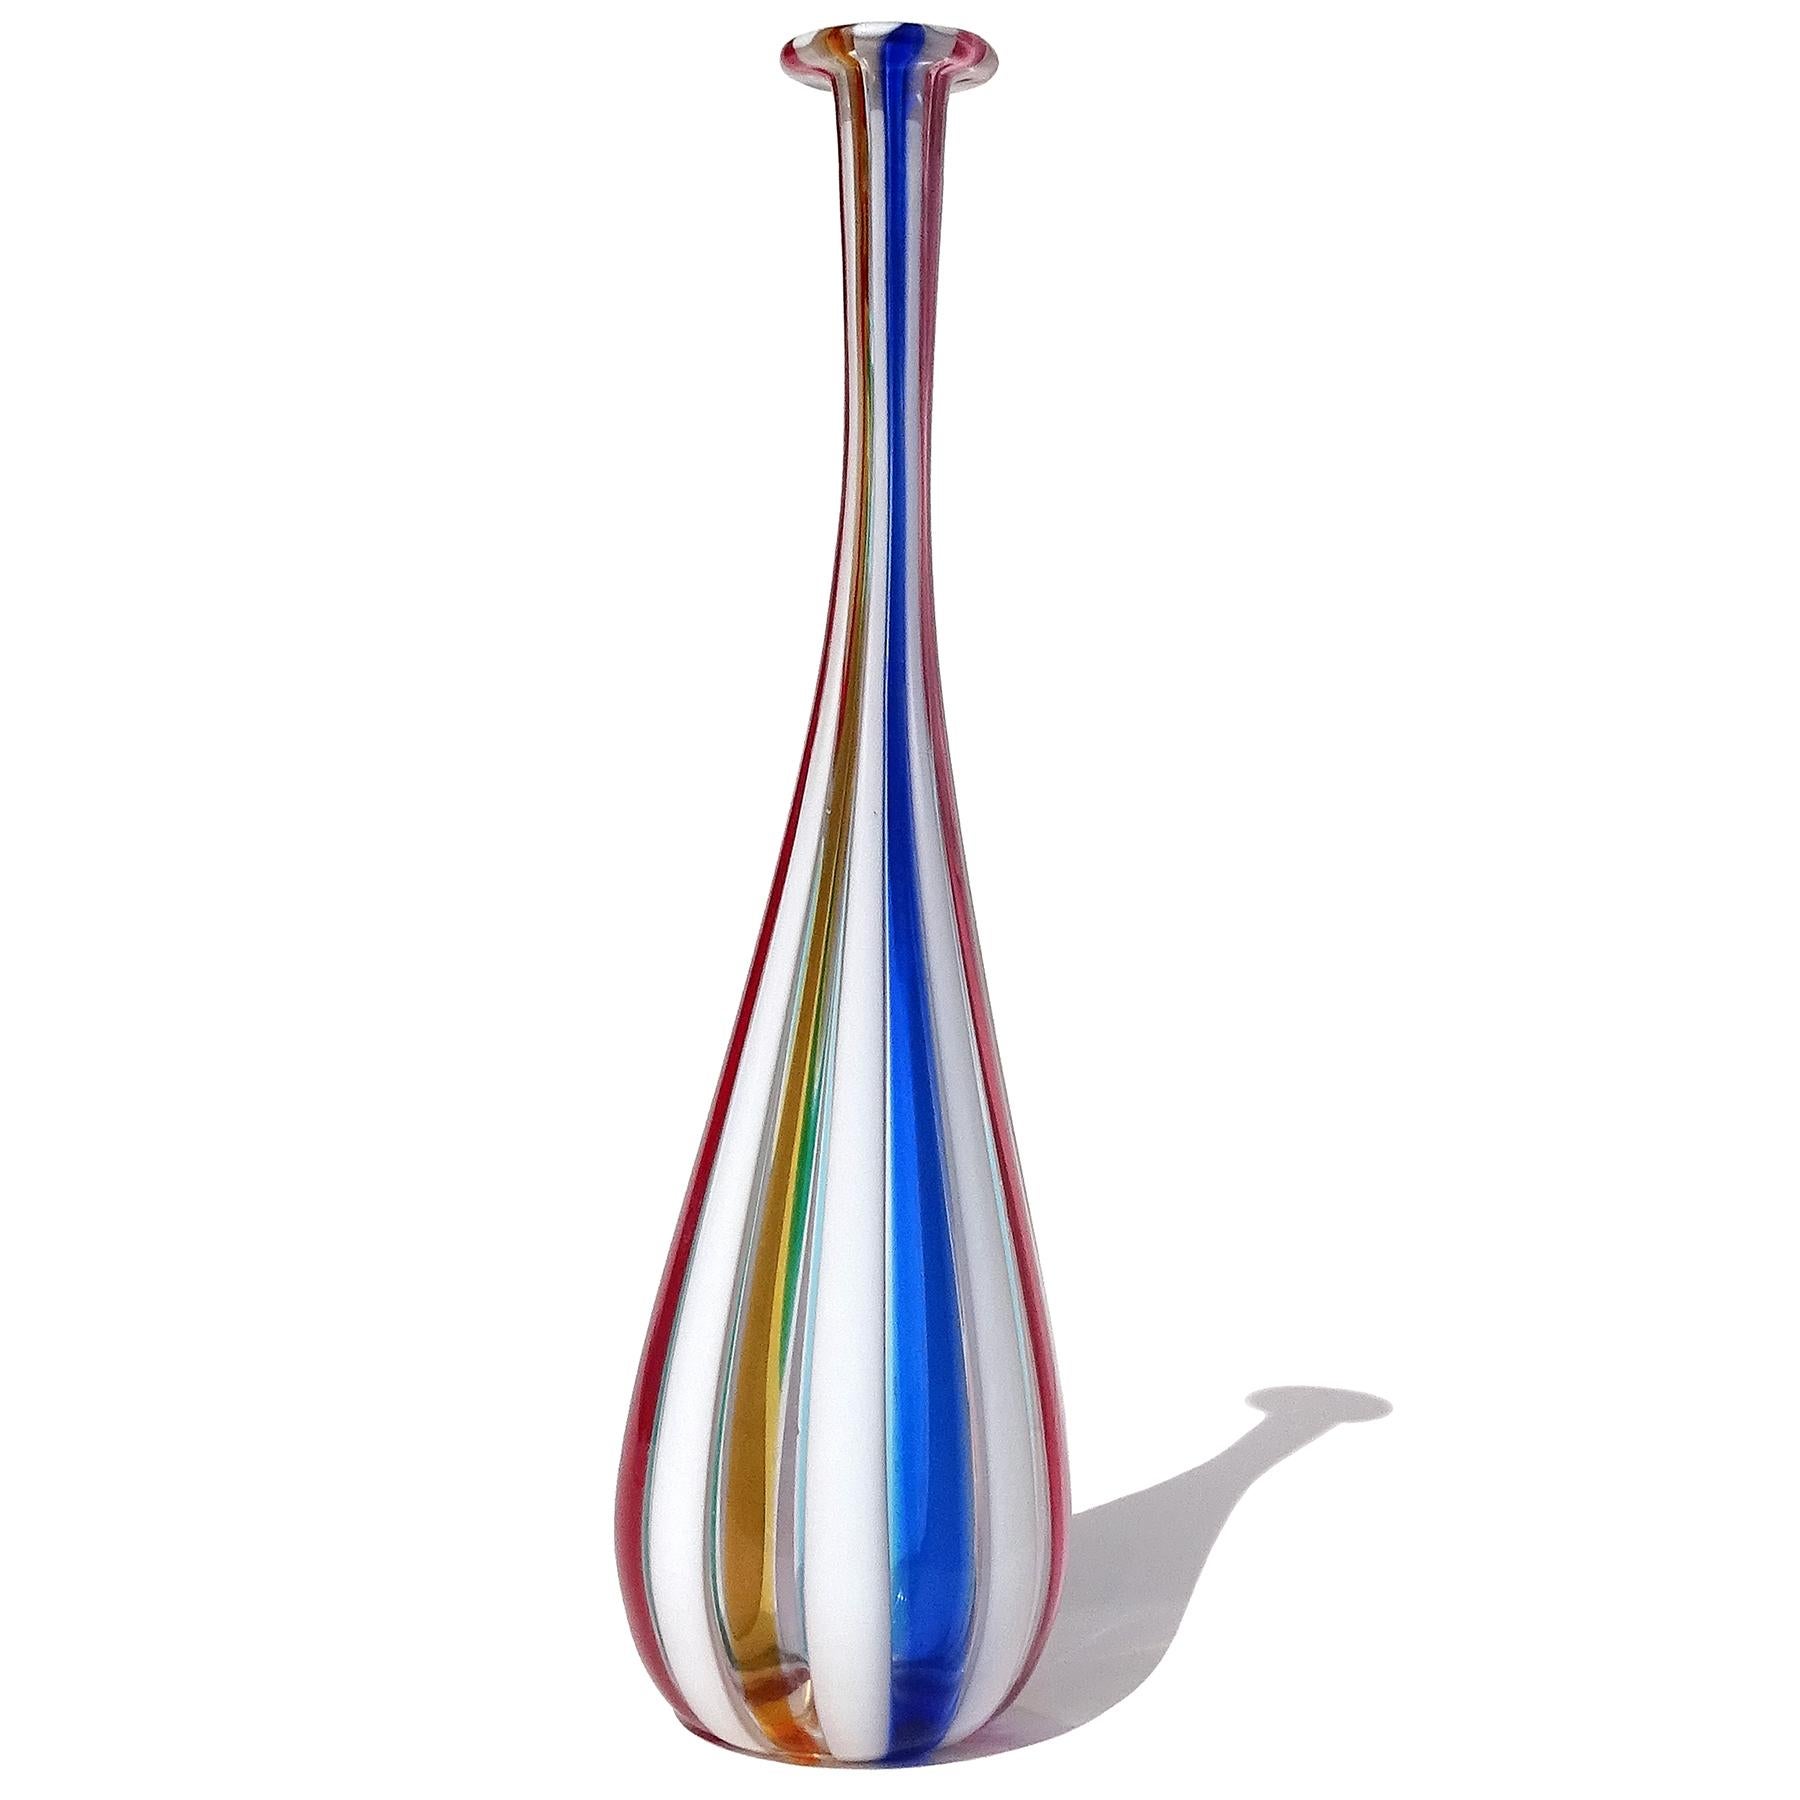 Beautiful vintage Murano hand blown multi-color vertical stripes Italian art glass soliflore / specimen flower vase. The vase has a rainbow of colors, with cobalt blue, sky blue, bright red, pink, amethyst, bright yellow orange, and emerald green.